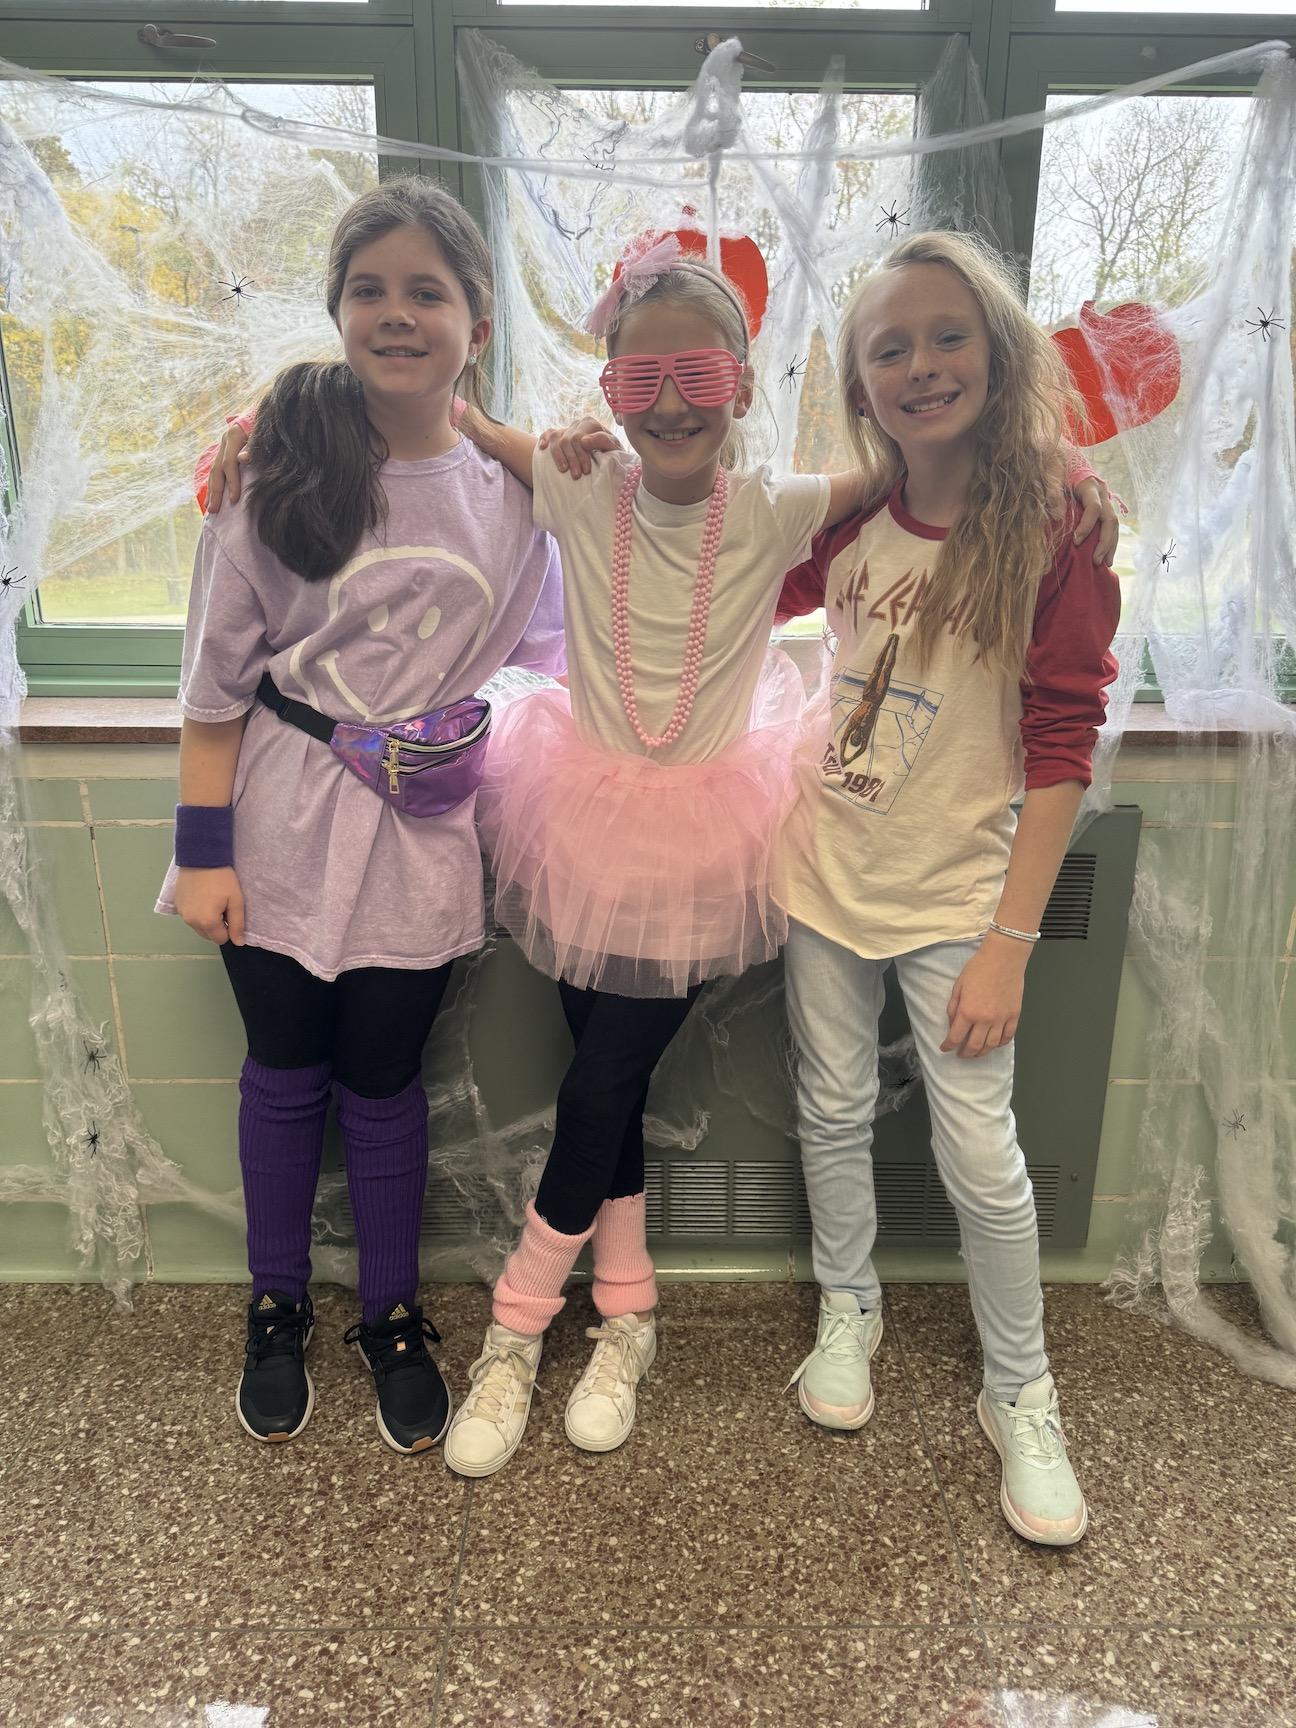 Trafford Middle School students Rebecca Tirpak, Laney Rosenberry, and Zoey Wade dress in 80s & 90’s theme to represent “Drugs are so old”